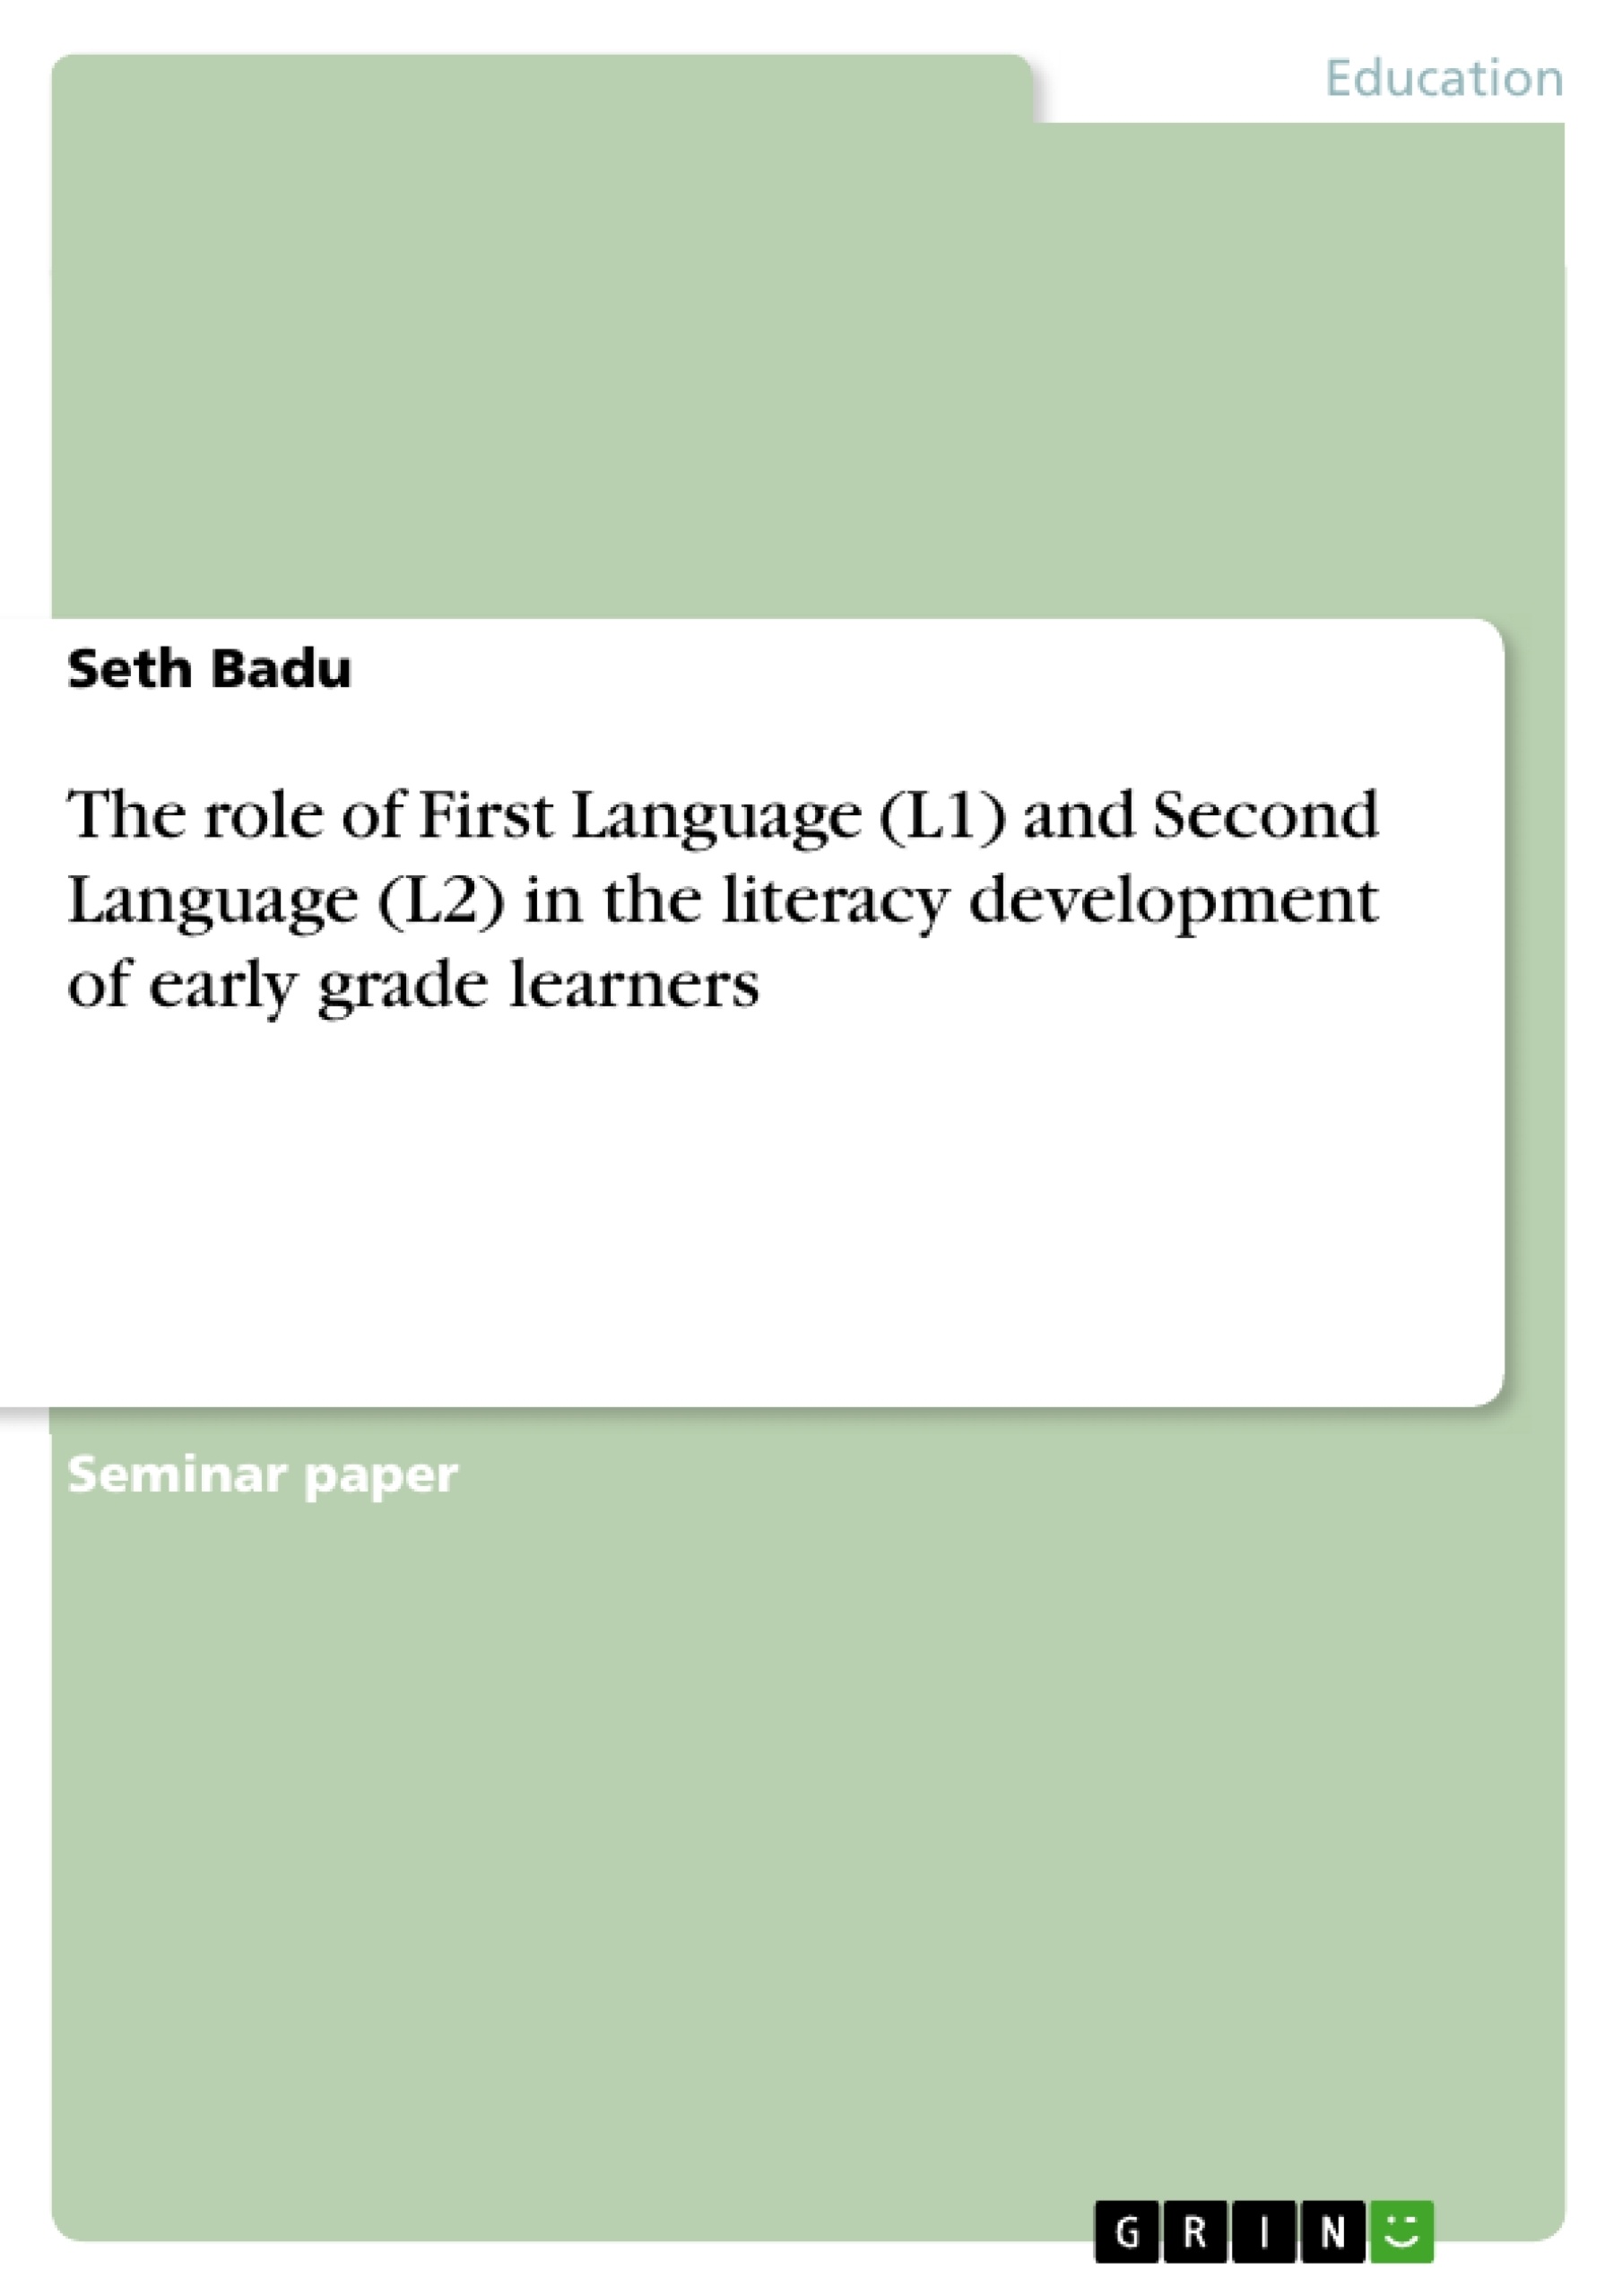 Título: The role of First Language (L1) and Second Language (L2) in the literacy development of early grade learners